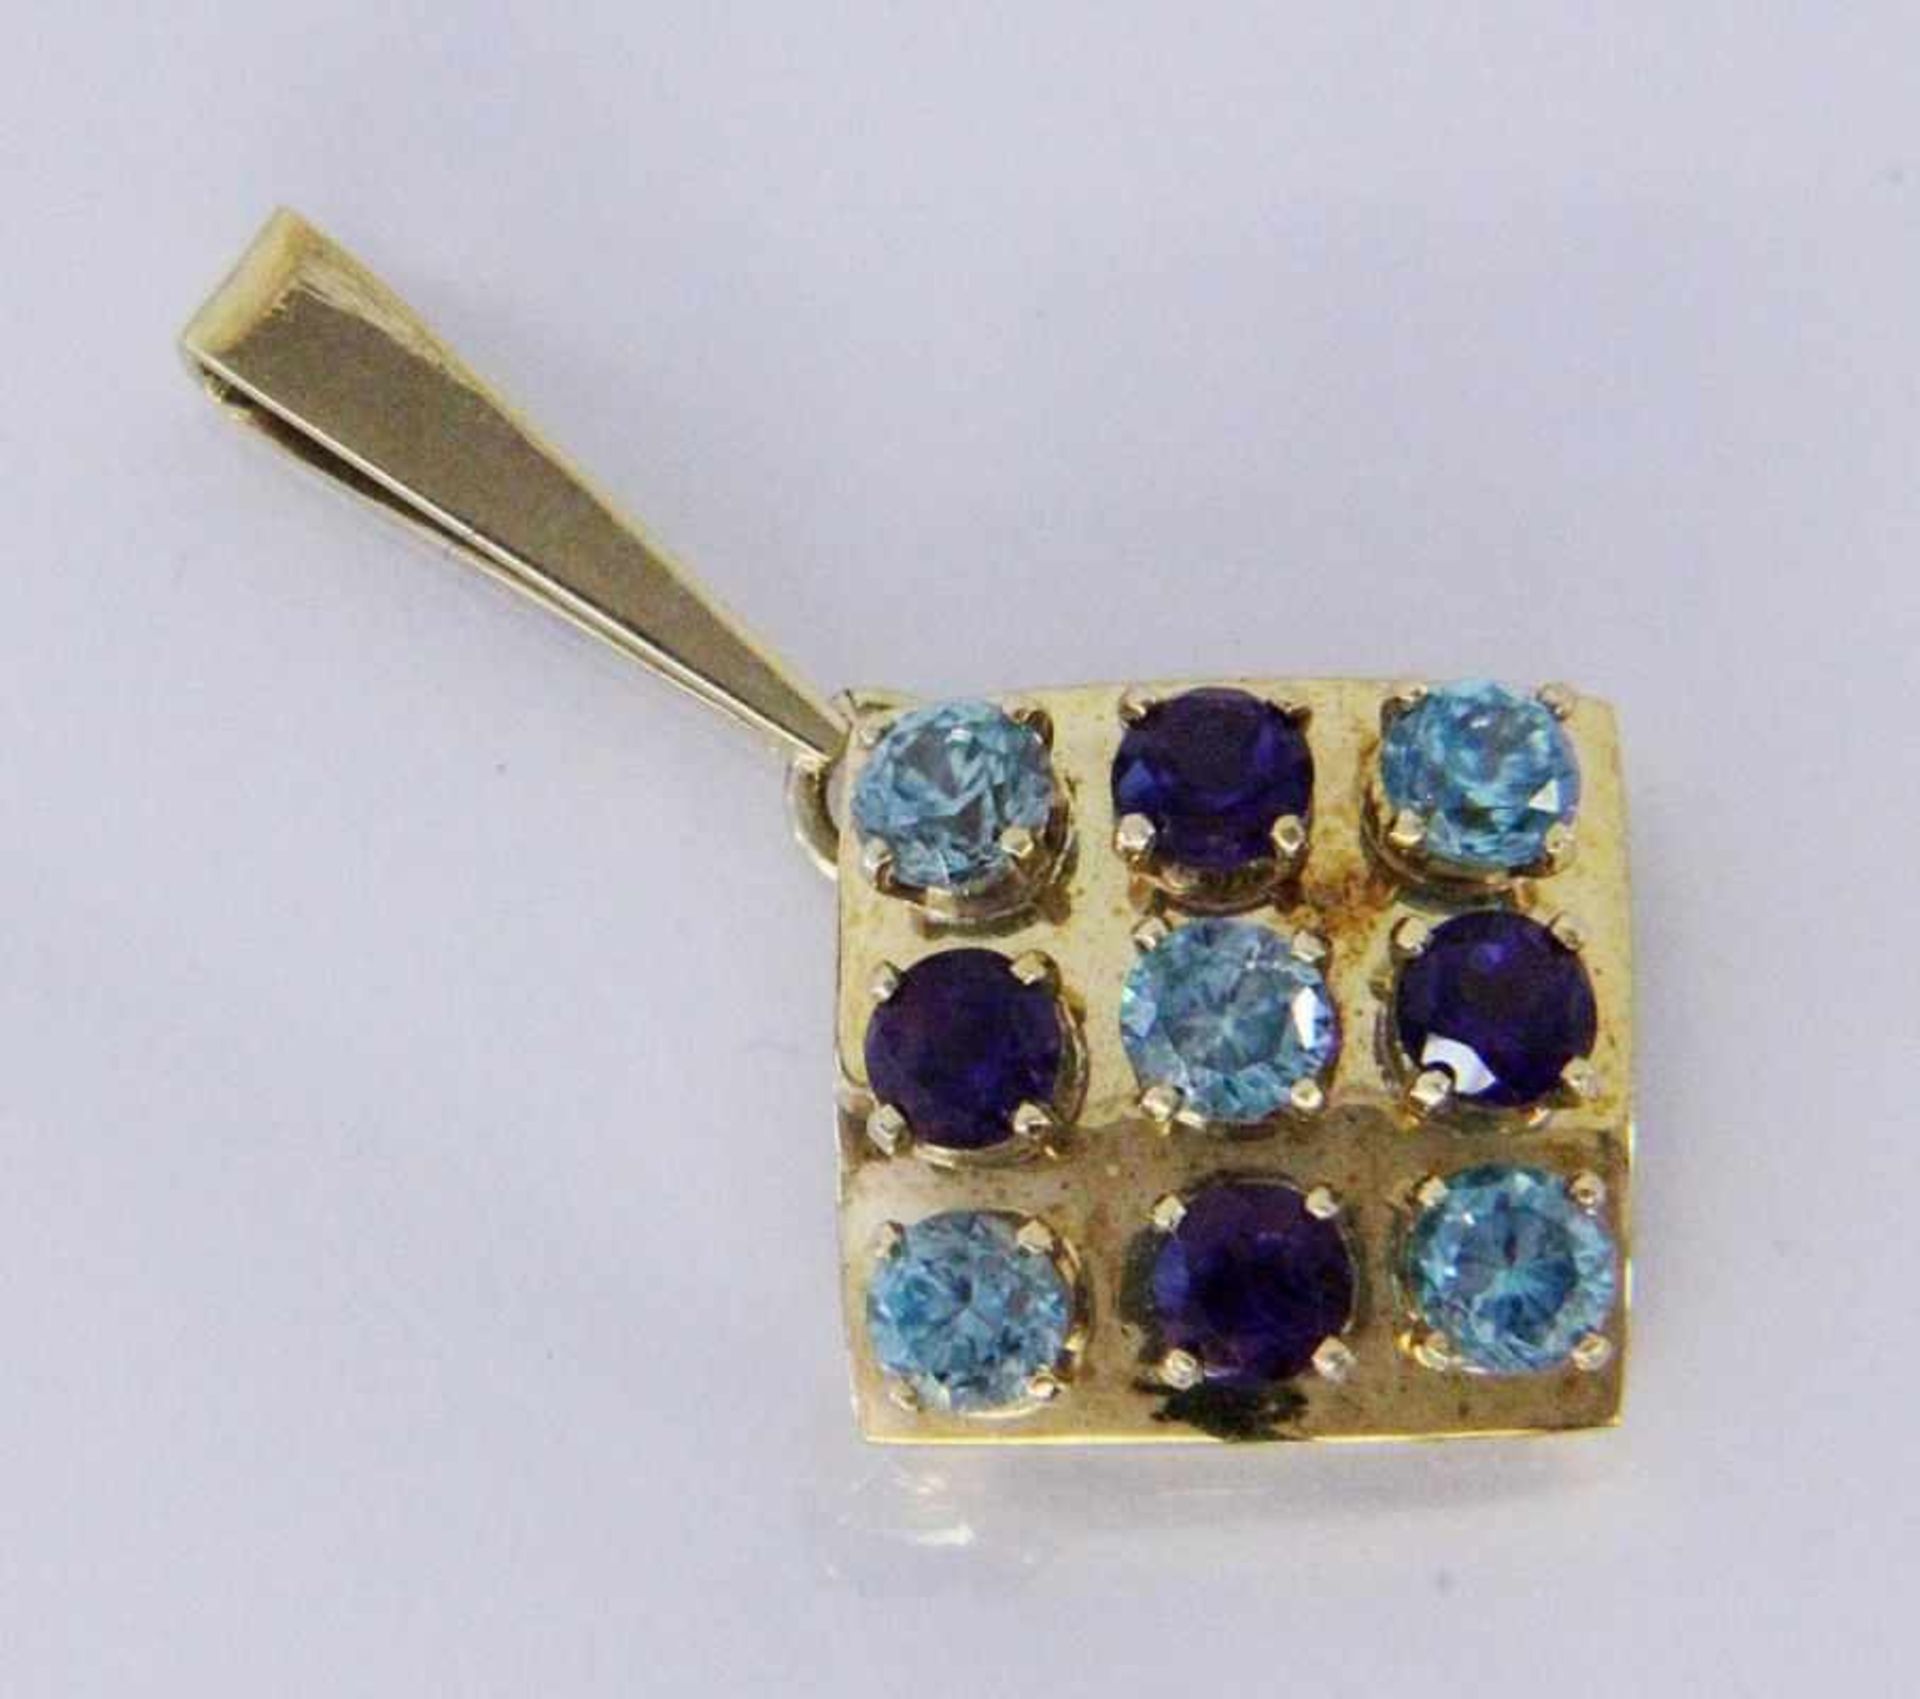 A PENDANT 585/000 yellow gold with blue zircons and amethysts. 45 mm long, gross weight